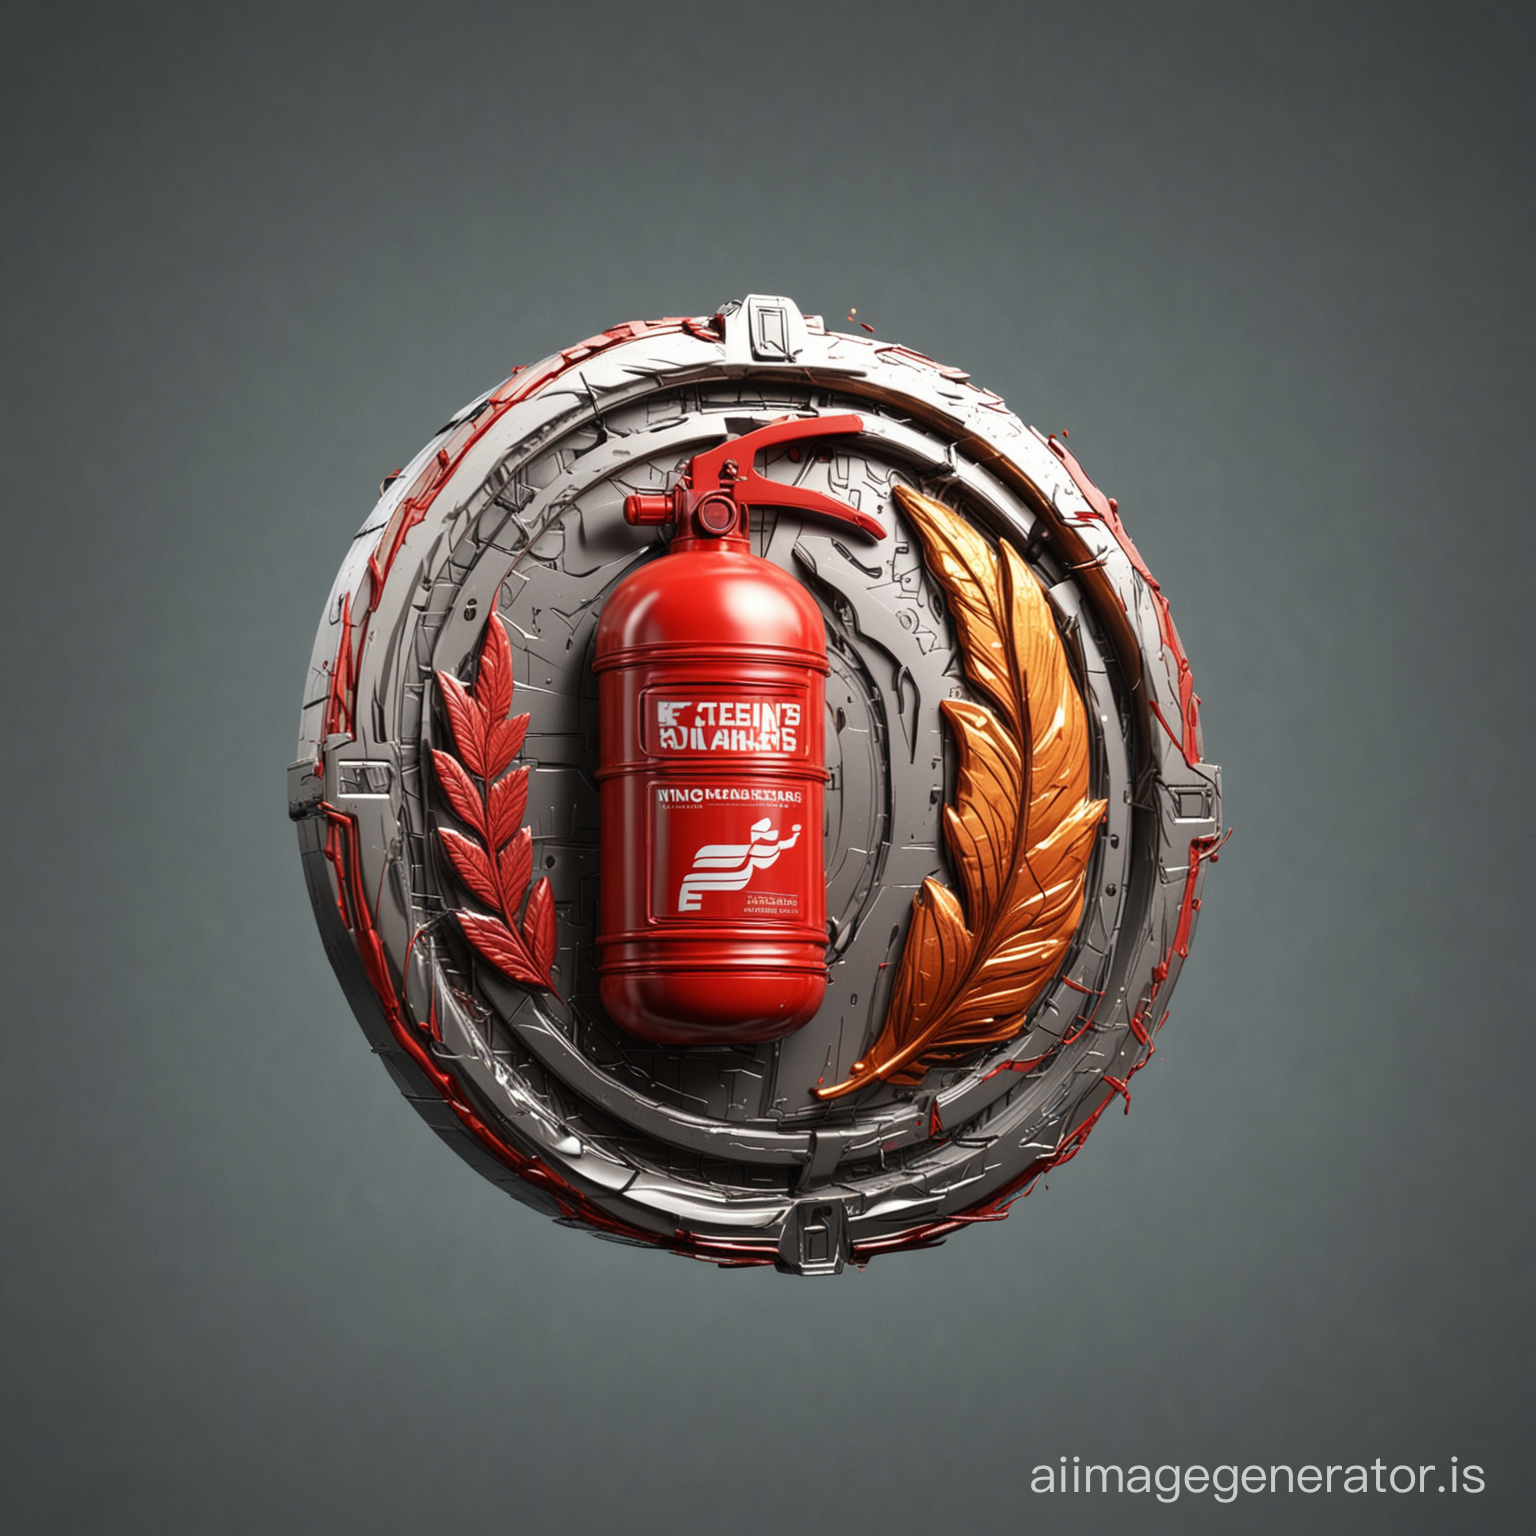 futuristic FIRE EXTINGUISHER logo in coin style 3D without background,
ZUBIAKSON PAKISTAN, high quality, 4k, realistic, details, futuristic,